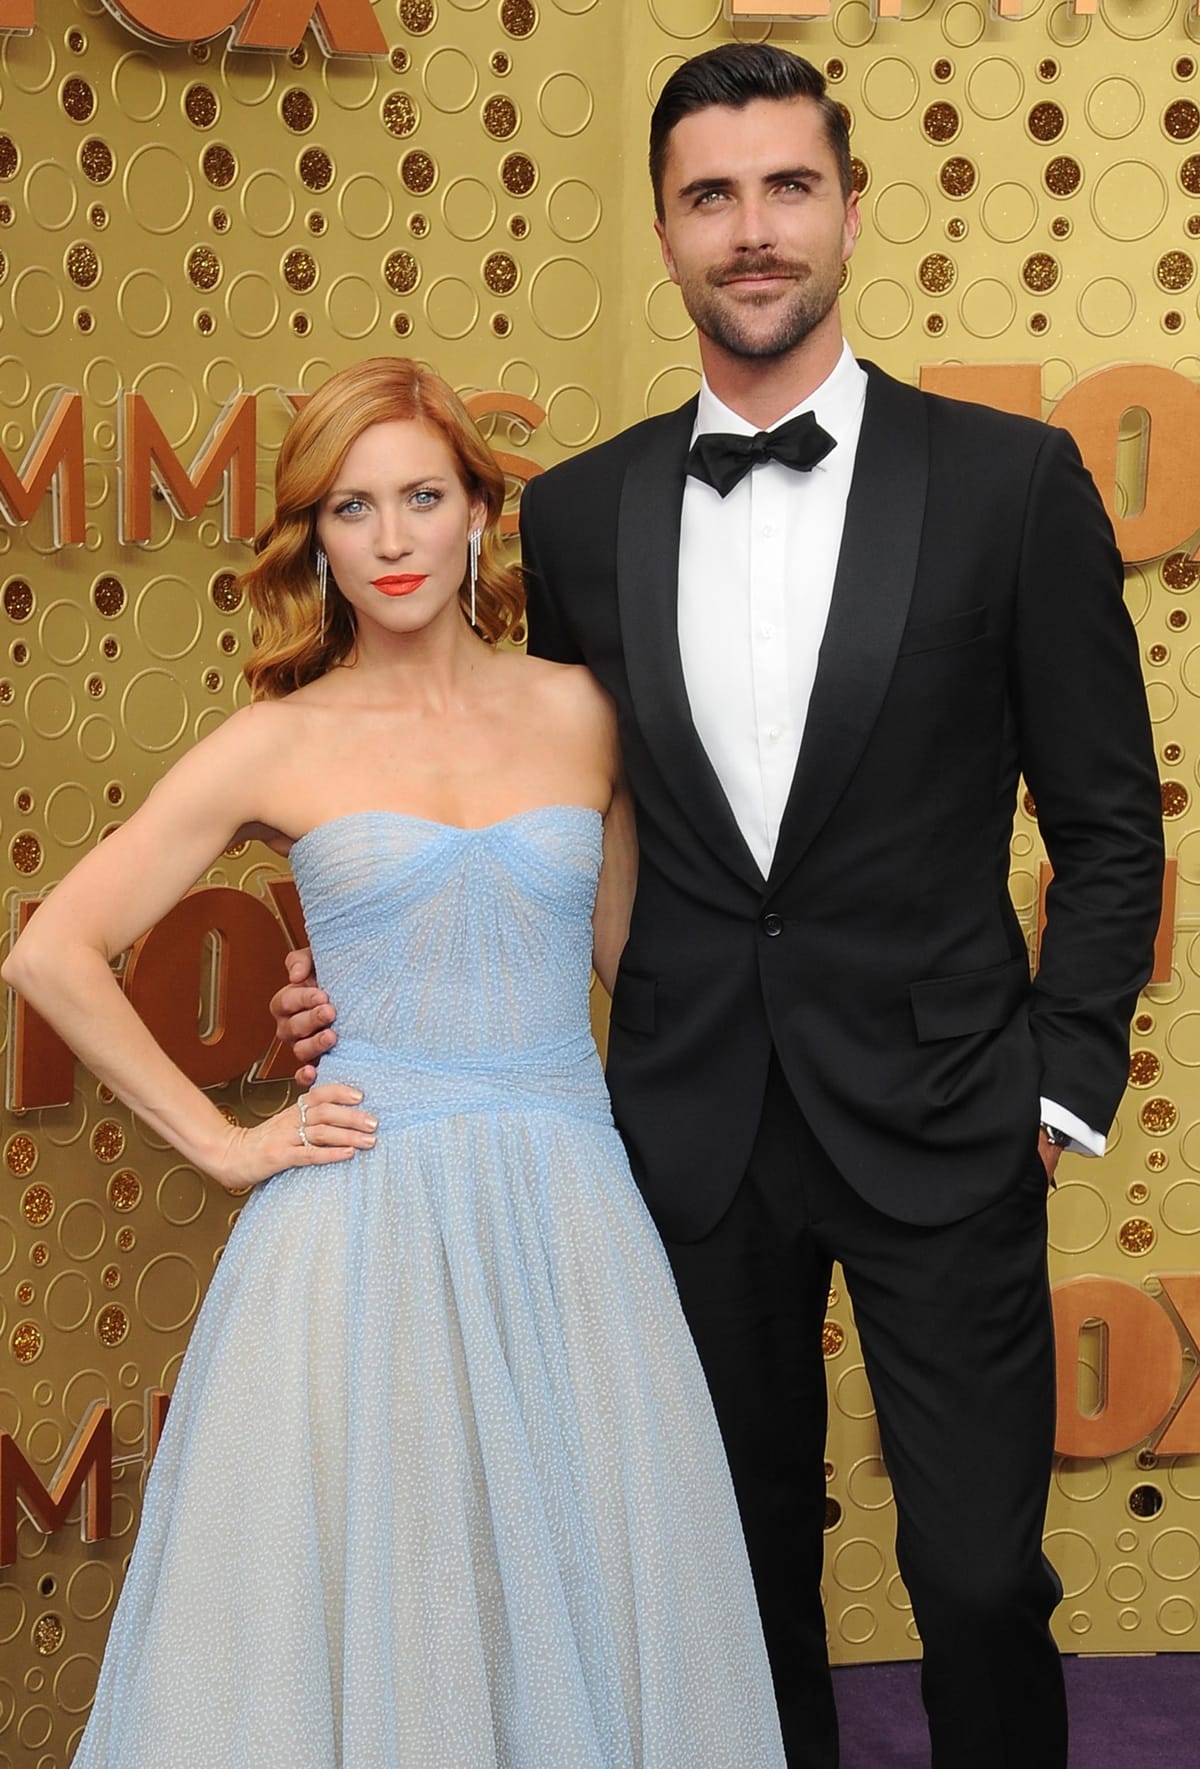 Brittany Snow is three years older and much shorter than her husband Tyler Stanaland